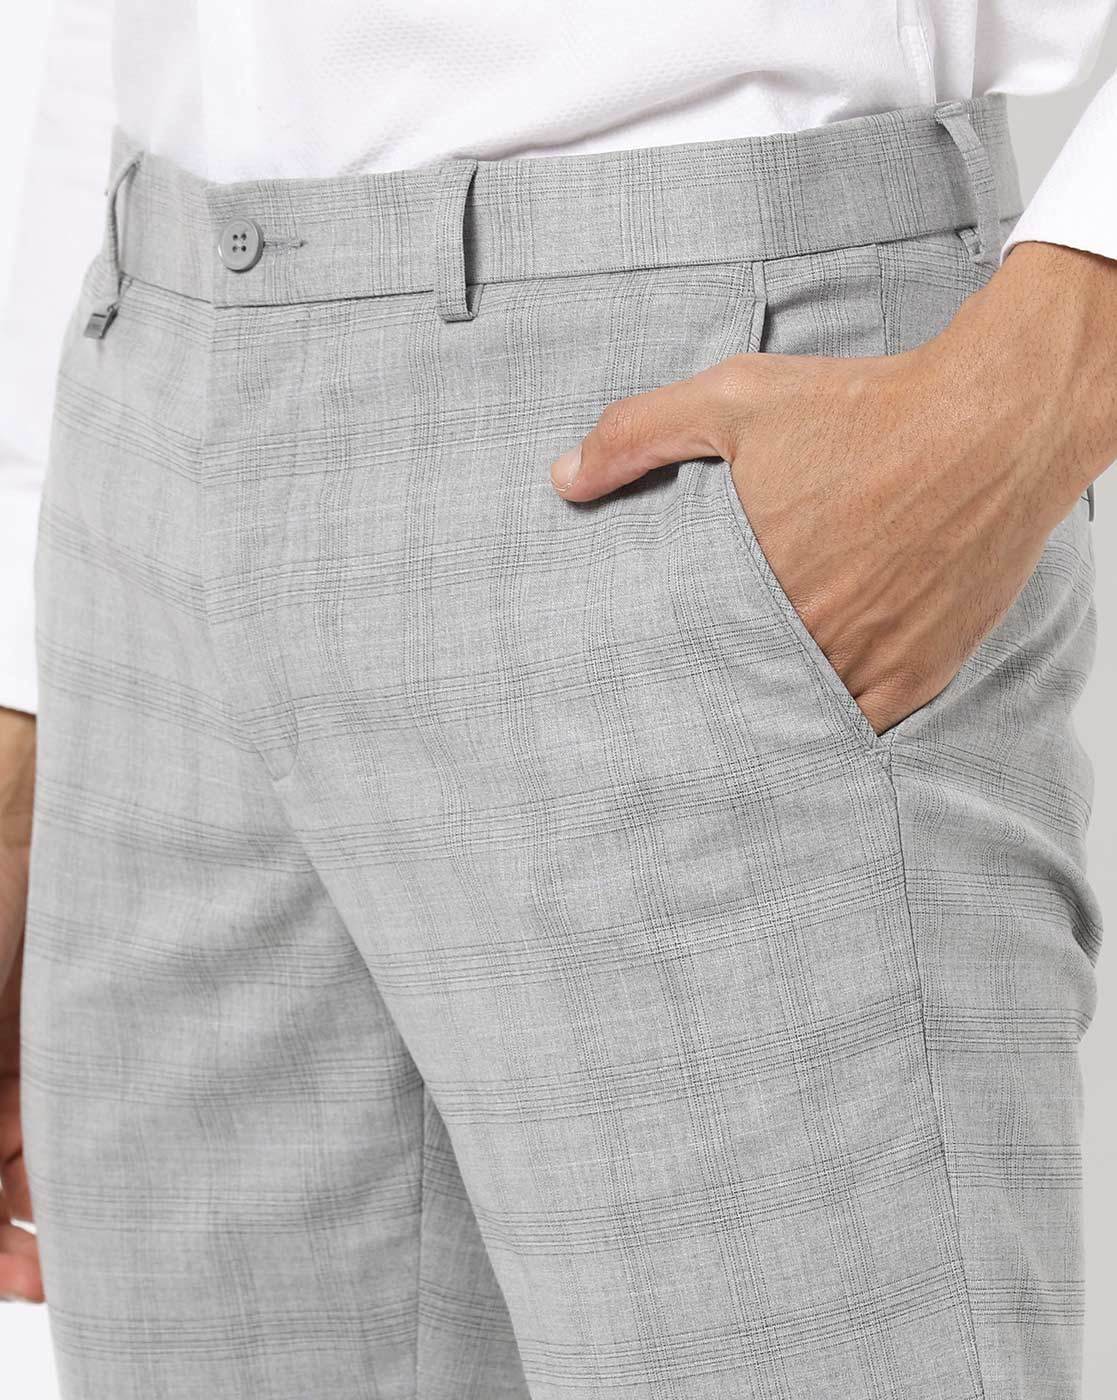 Smart Mens Trousers  Perfect For Weddings  XPOSED